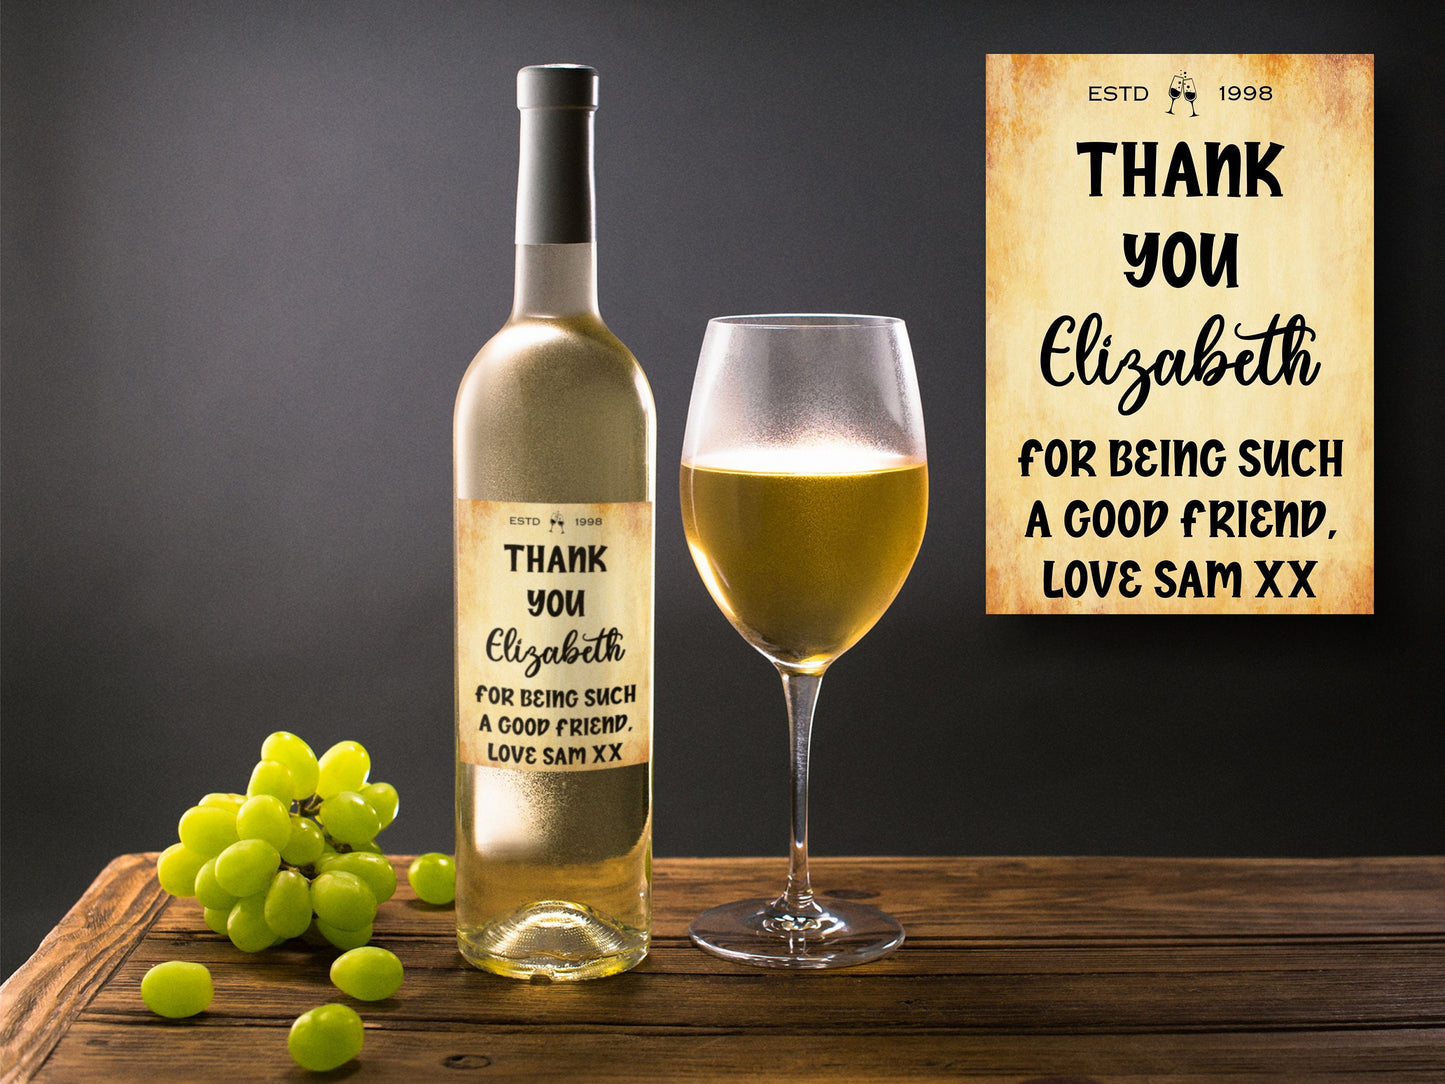 Thank You Bottle Labels  x2 - Vintage Style - Any Name Year and Message - To fit Wine Alcohol Bottles 68x99mm